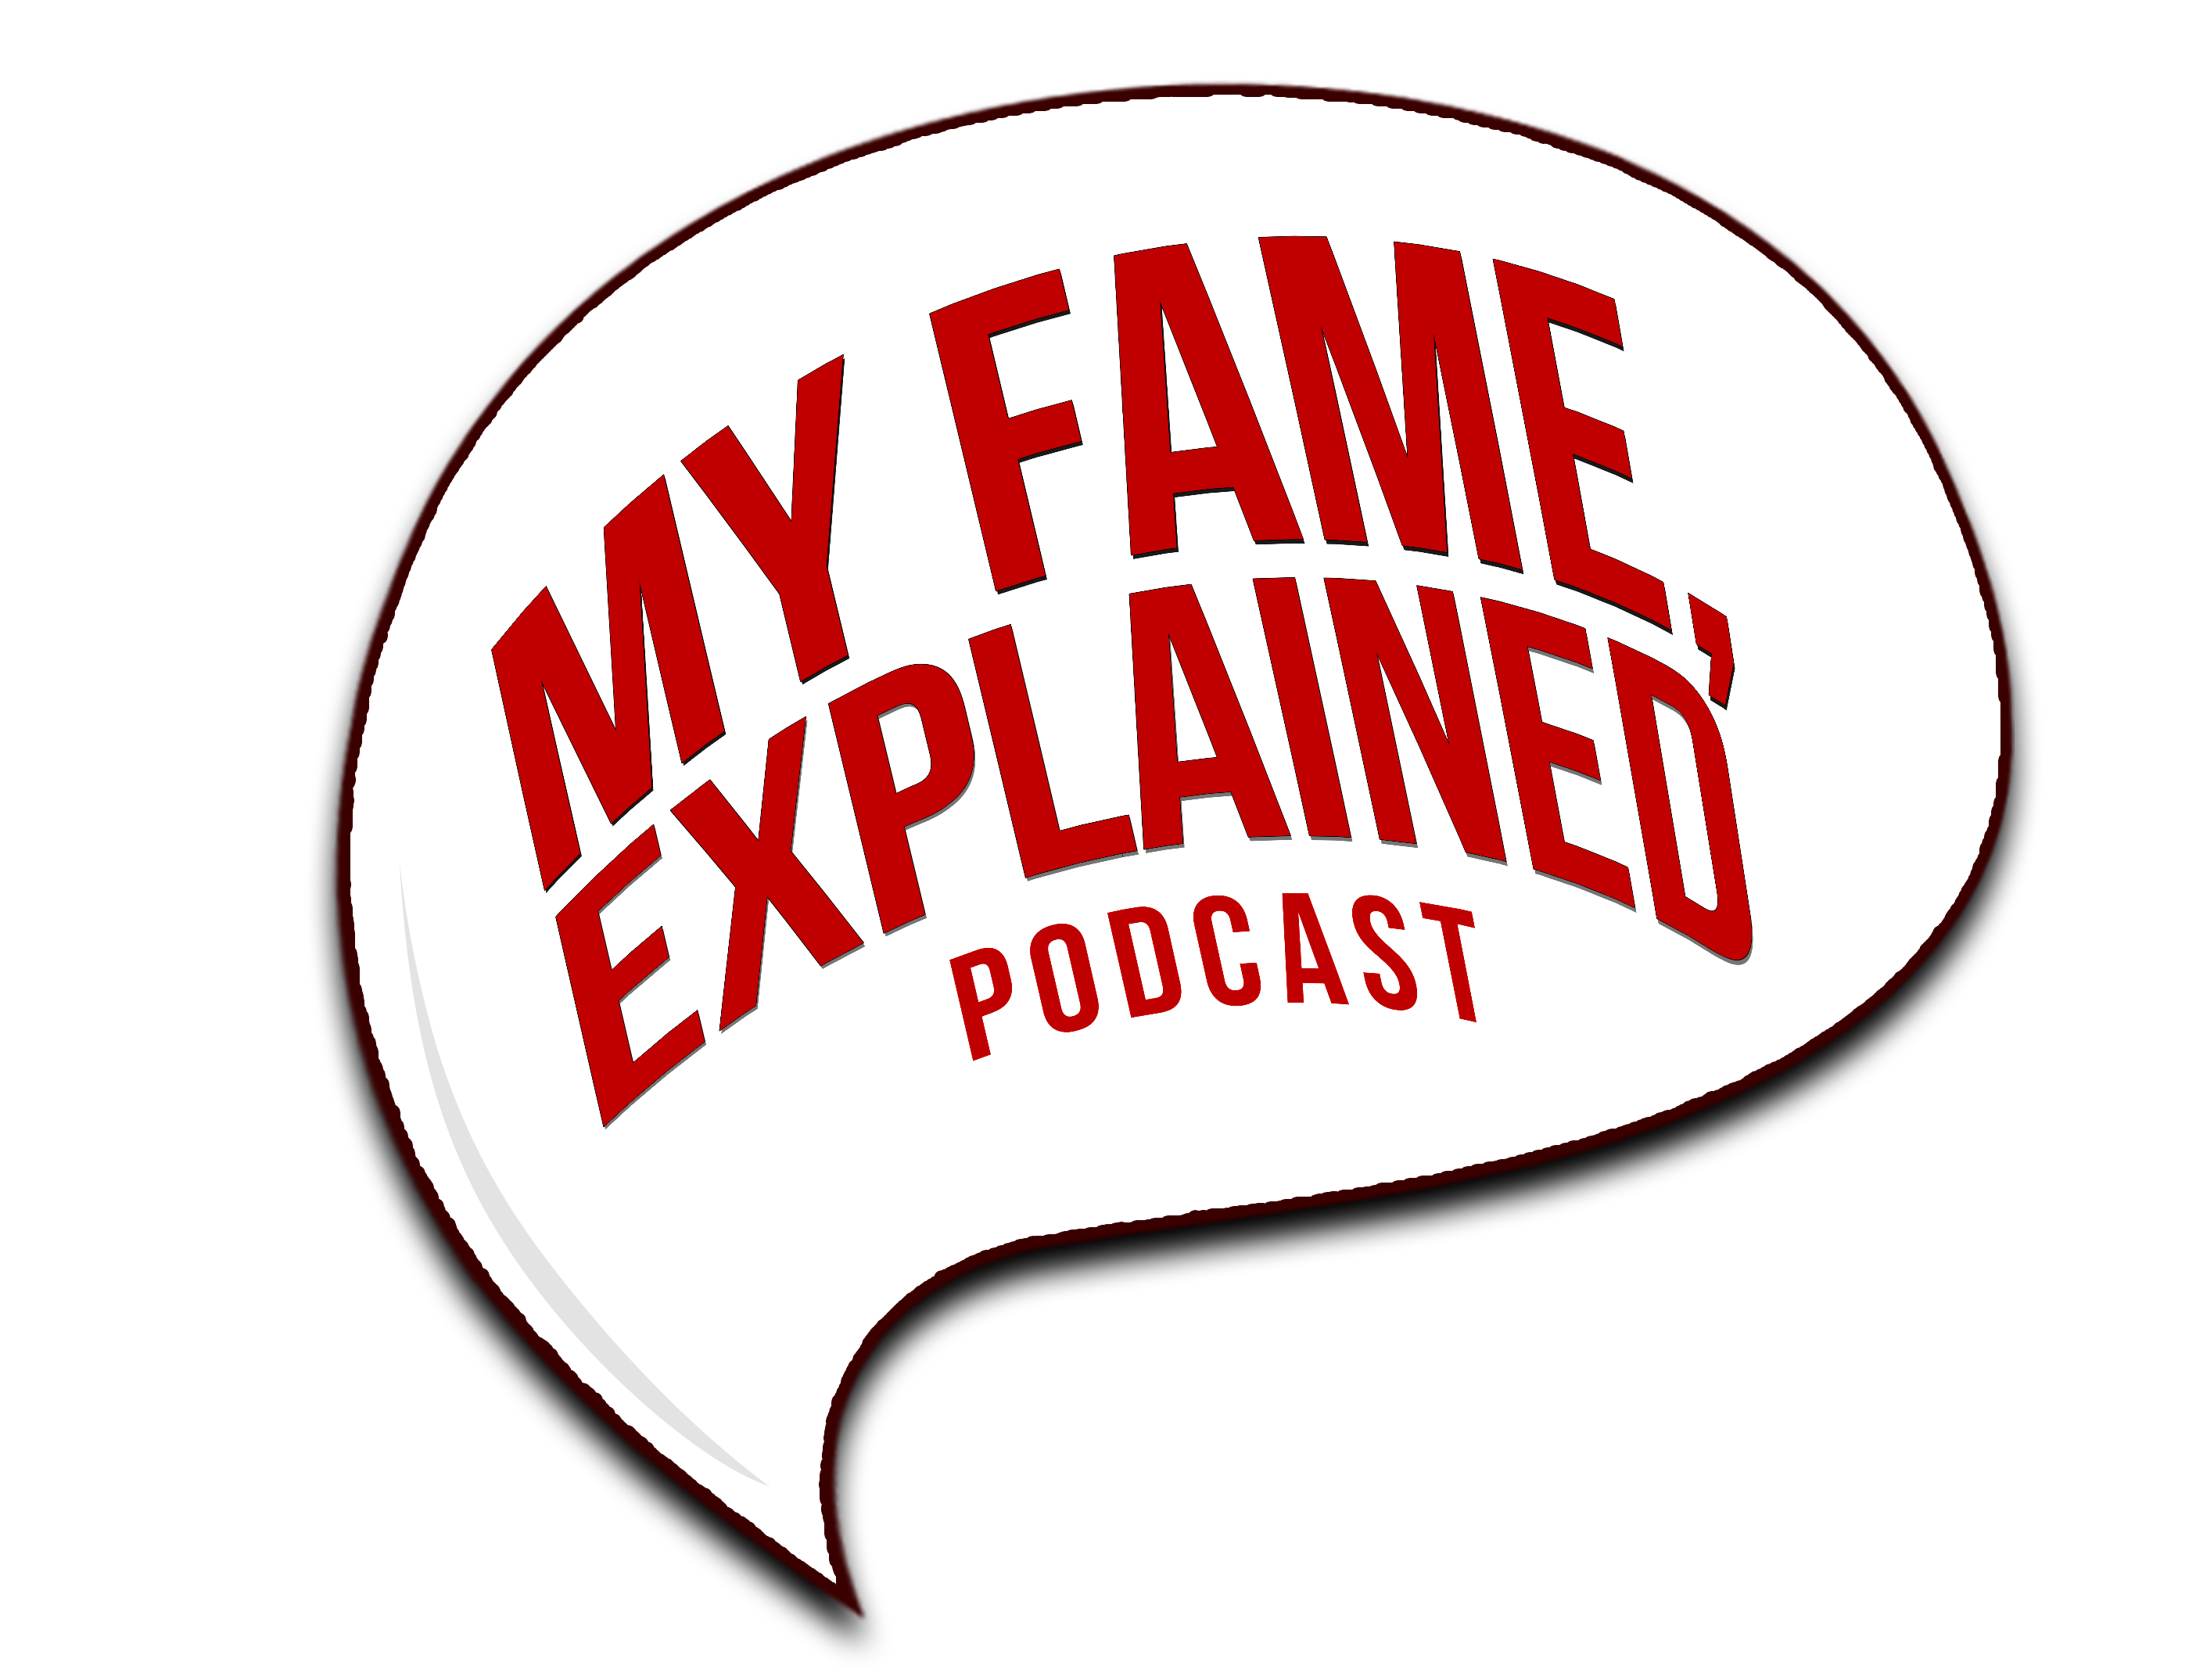 My Fame Explained podcast